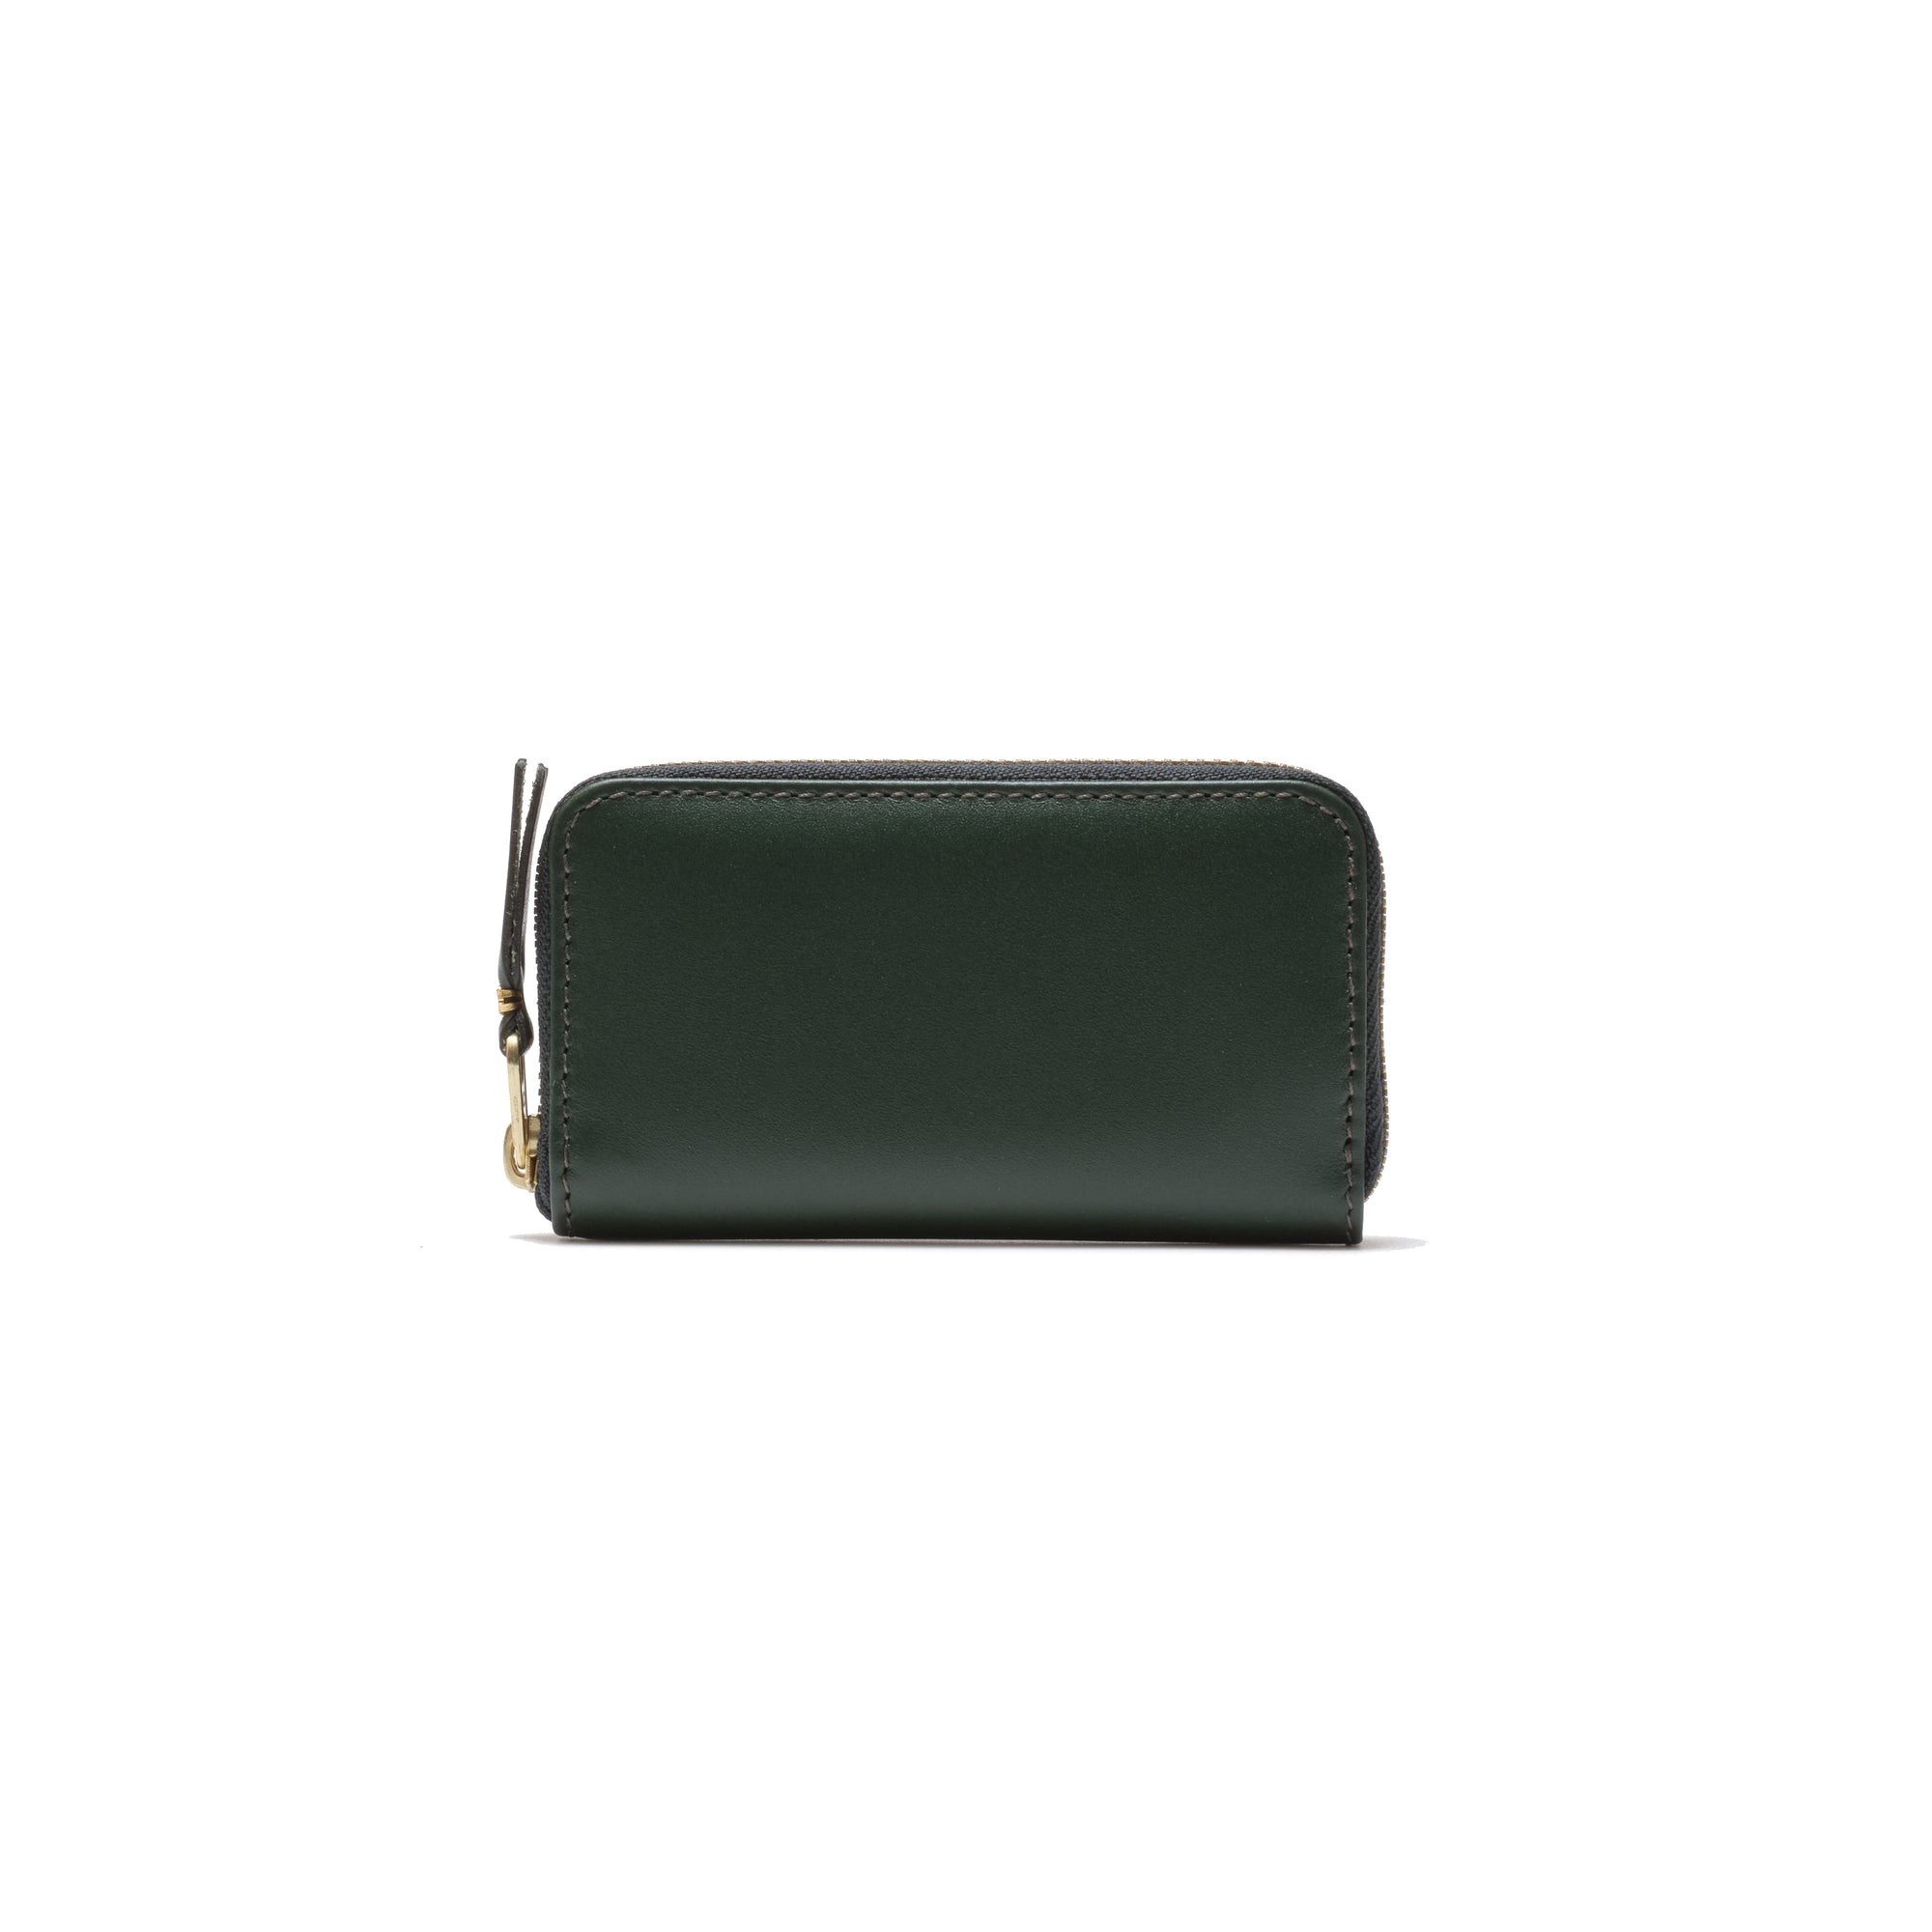 CDG WALLET - Classic Leather Line-8Z-D004 - (Bottle Green) view 1